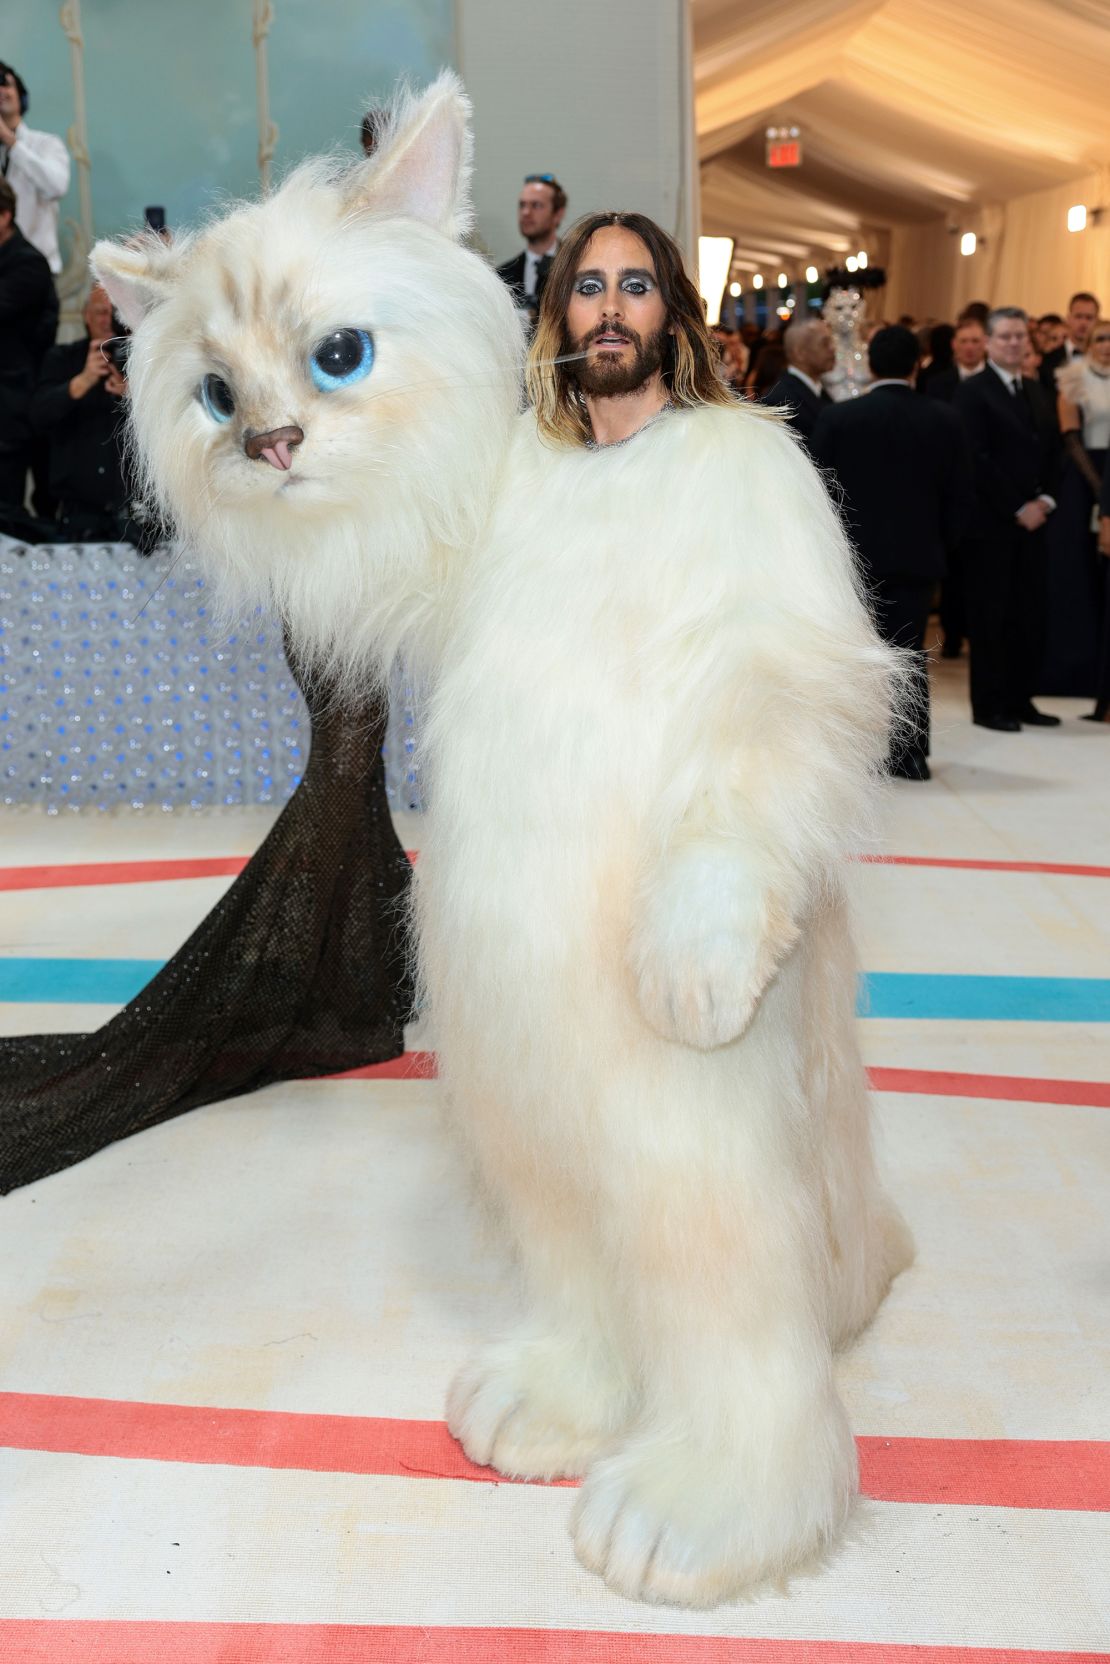 Doja Cat and Jared Leto dressed like Choupette the cat for the Met Gala